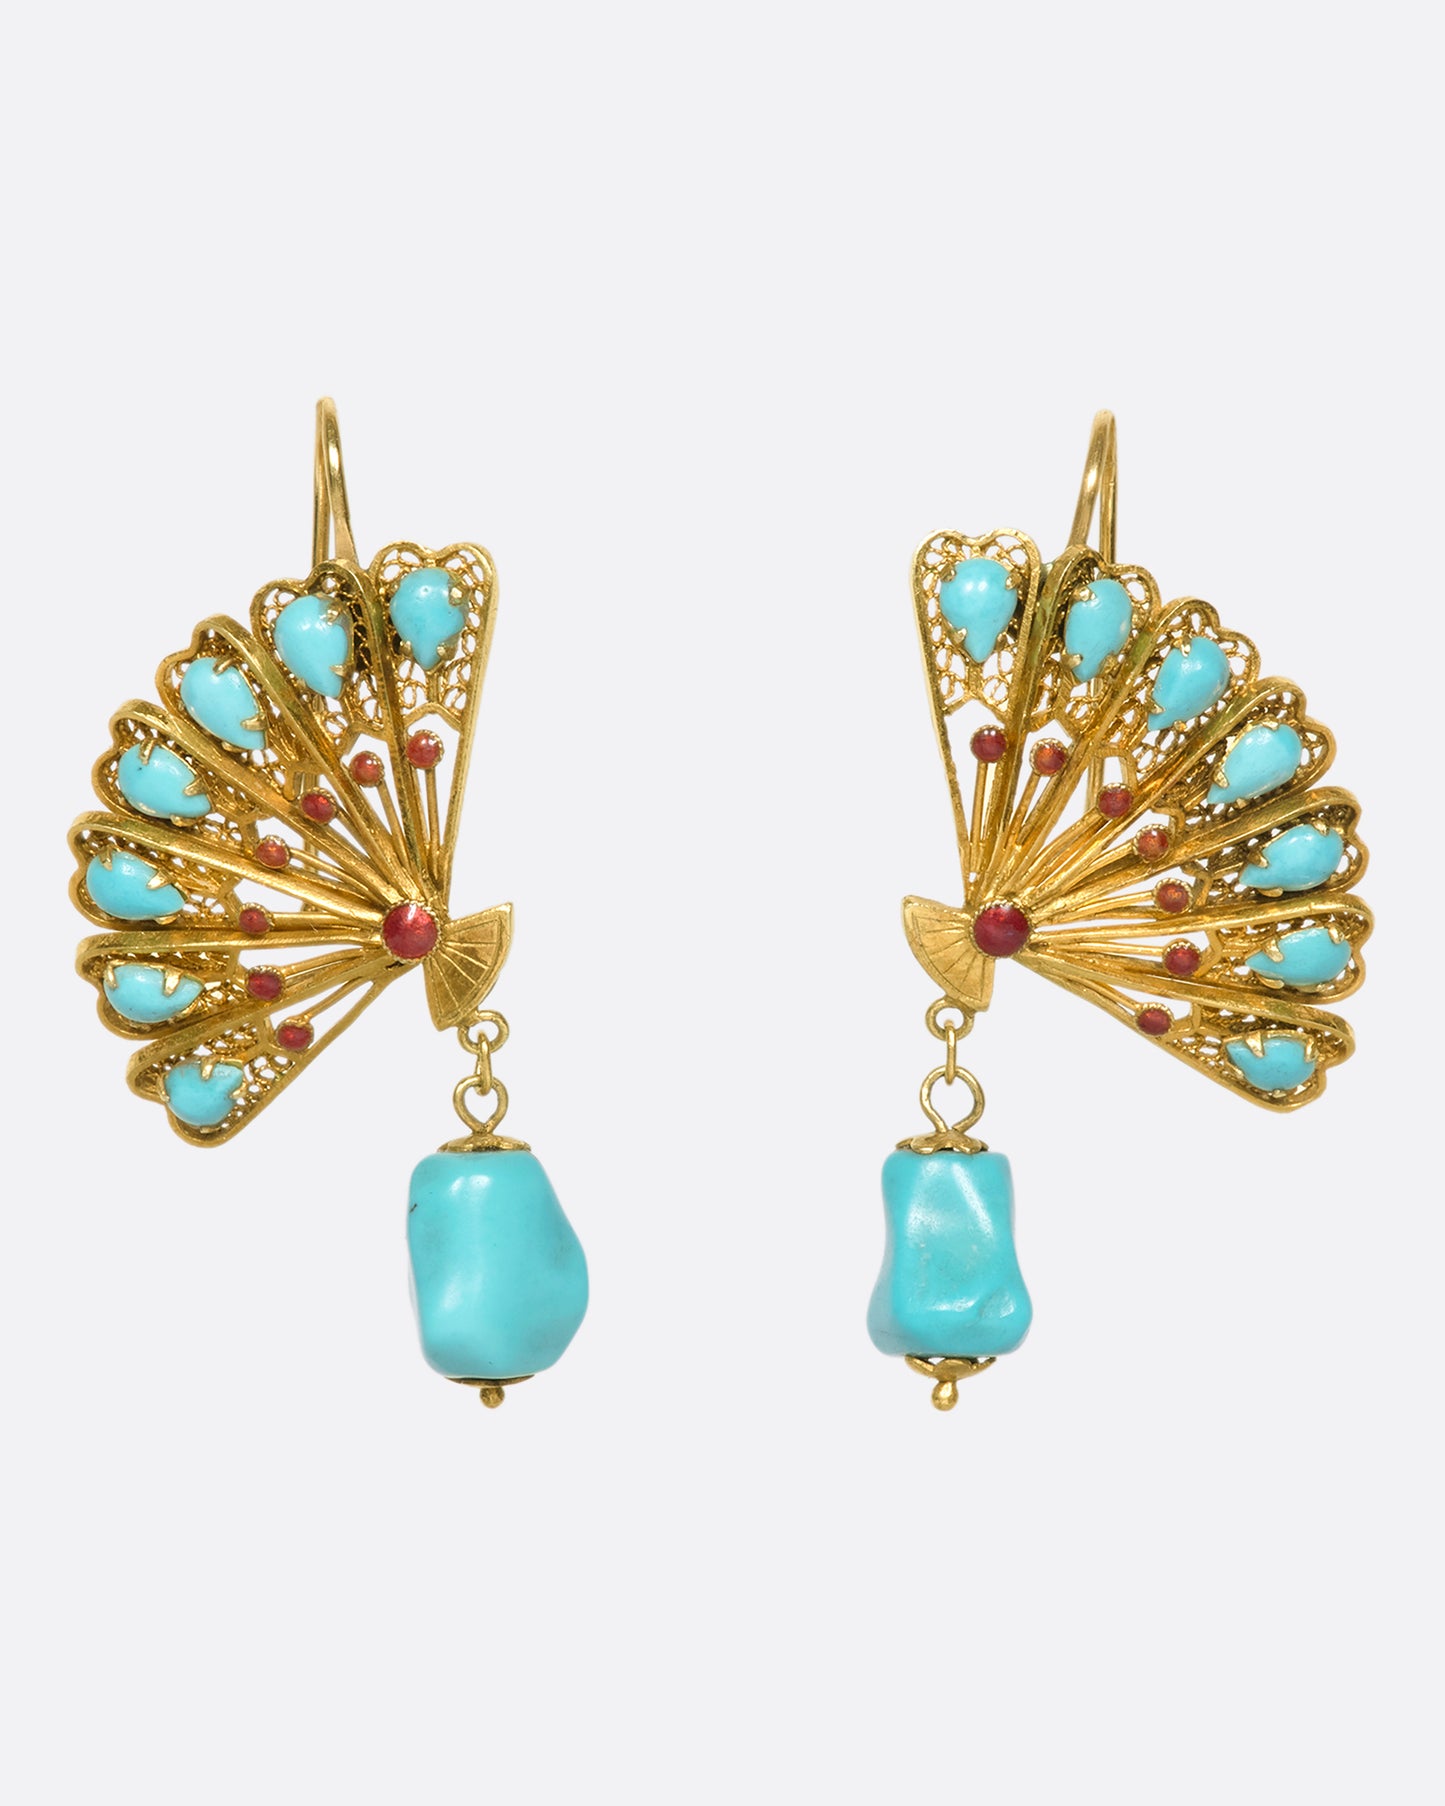 A pair of beautiful gold fan earrings with turquoises and red enamel details. We love these for their vintage vibe, versatile color palette, and sense of balance the hanging stones creates.